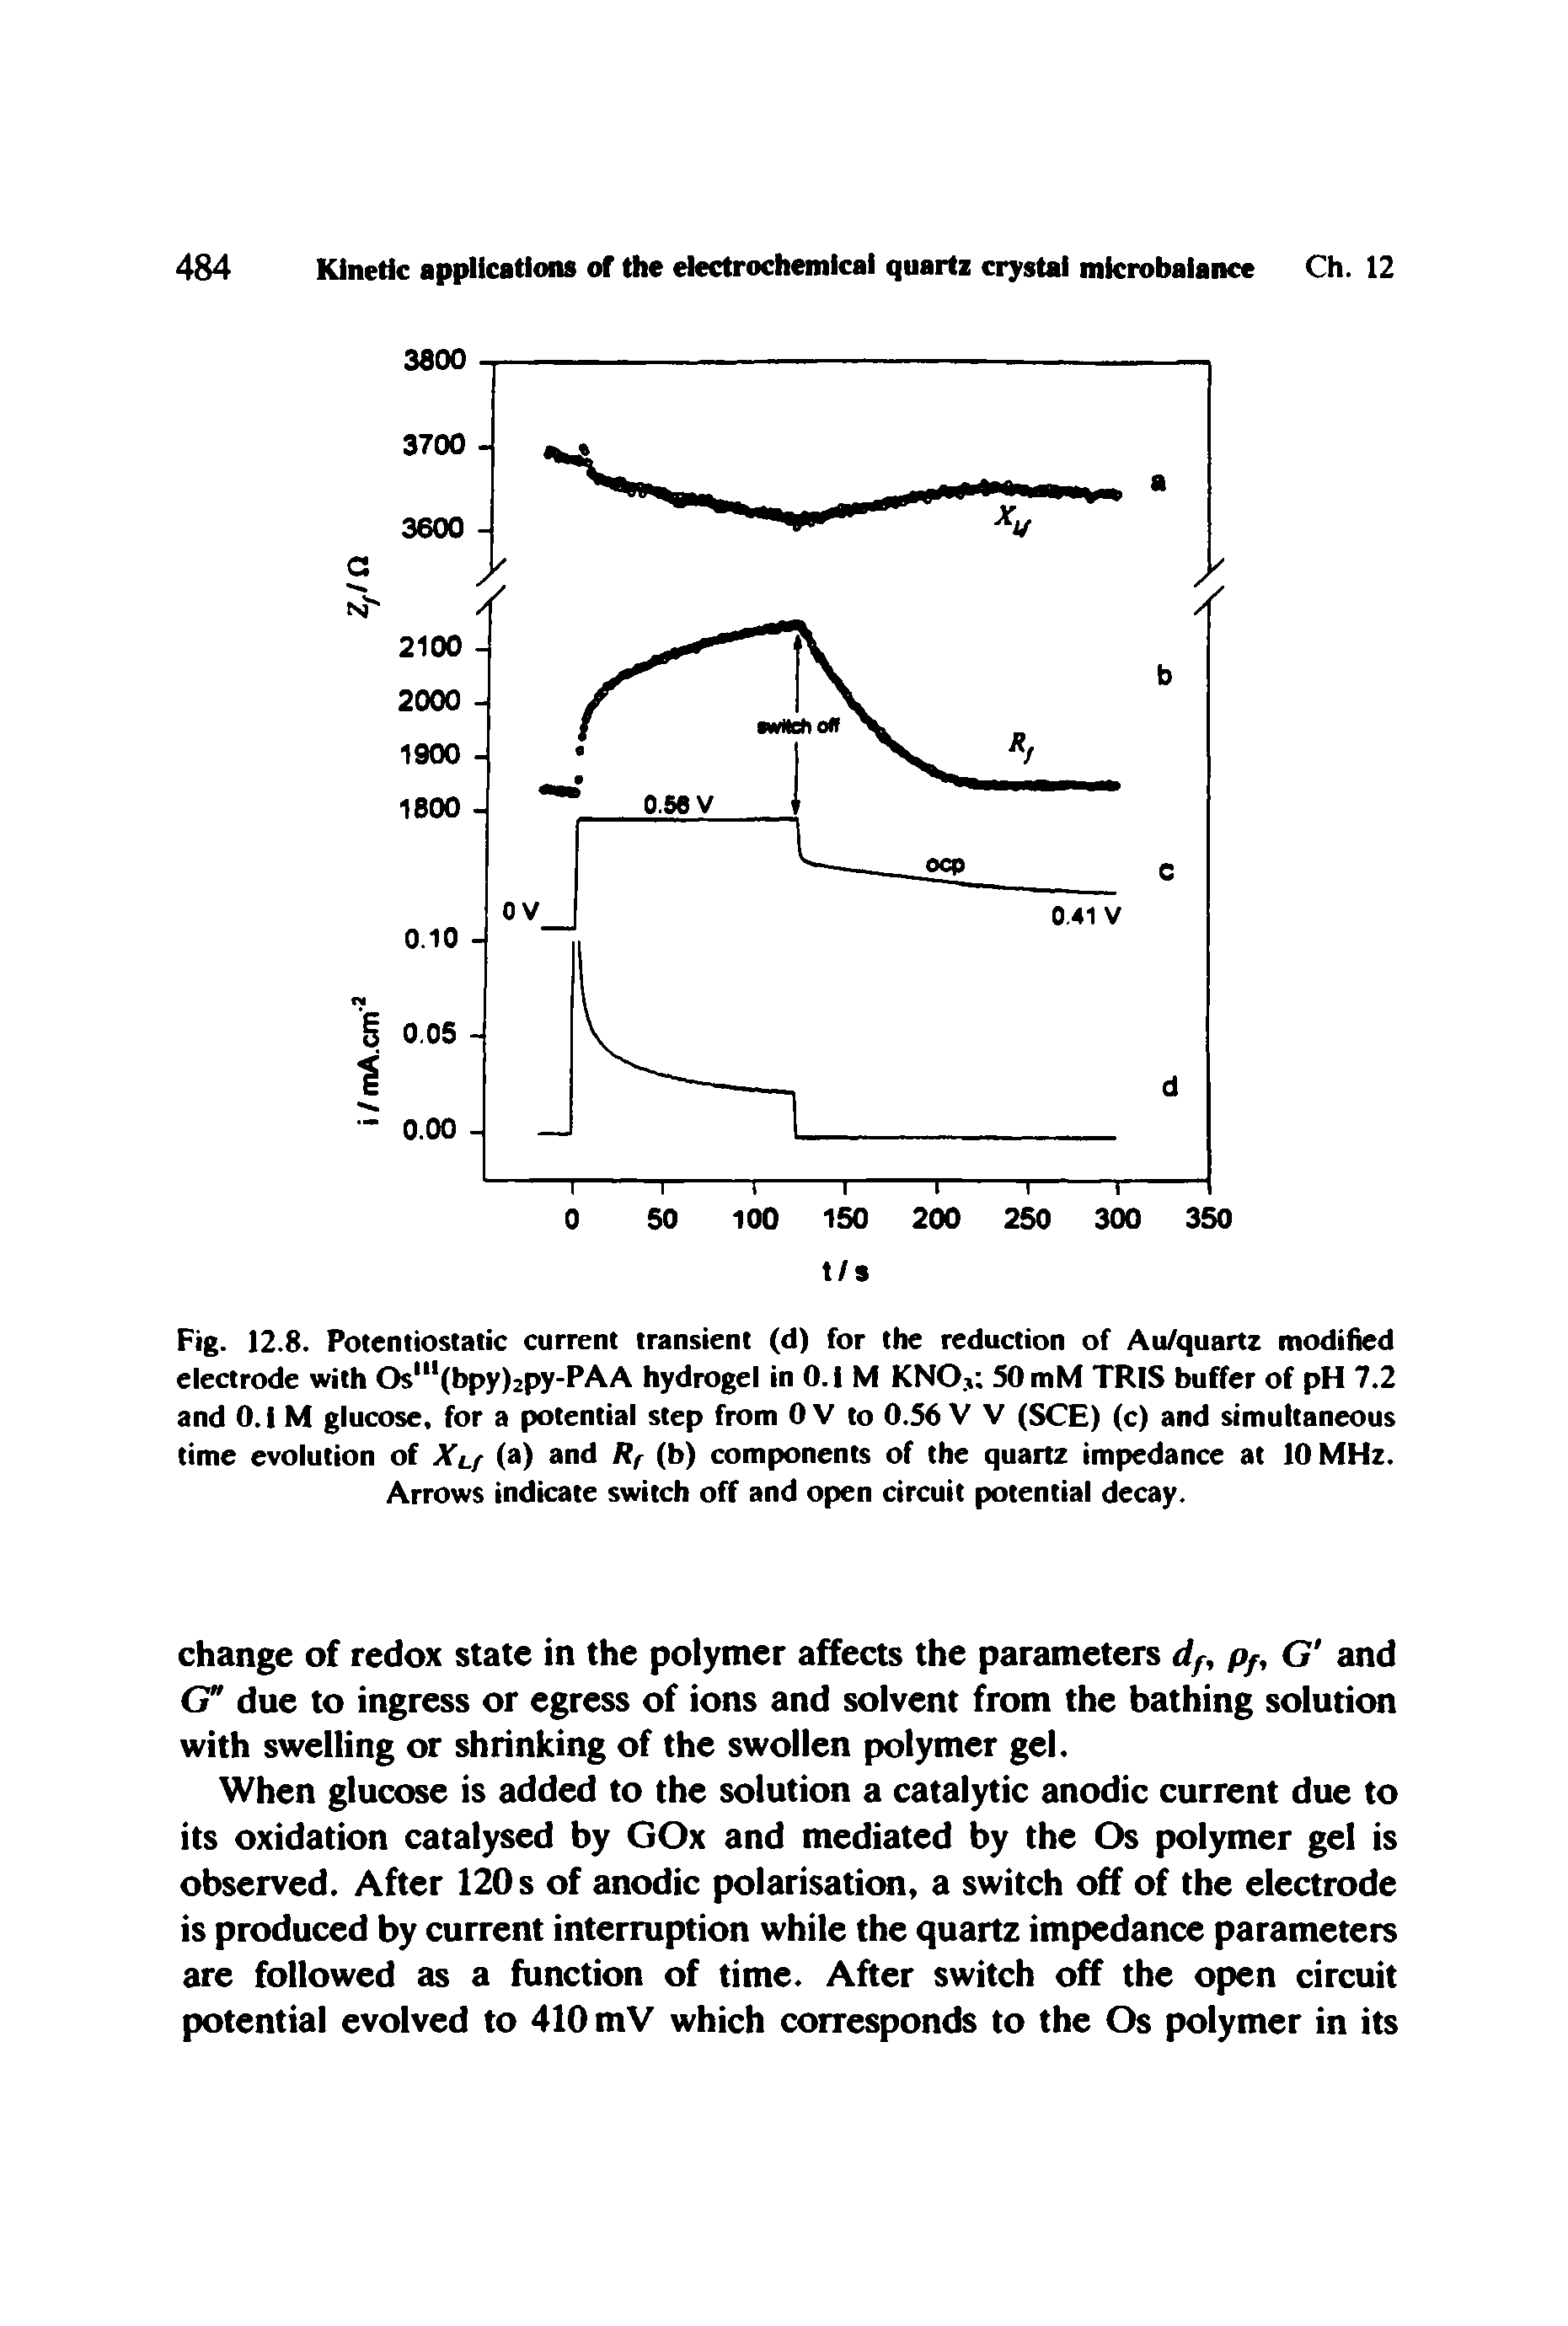 Fig. 12.8. Potentiostatic current transient (d) for the reduction of Au/quartz modified electrode with Os,(bpy)2py-PAA hydrogel in 0.1 M KNO, 50 mM TRIS buffer of pH 7.2 and 0.1 M glucose, for a potential step from 0 V to 0.56 V V (SCE) (c) and simultaneous time evolution of XLf (a) and Rf (b) components of the quartz impedance at 10 MHz.